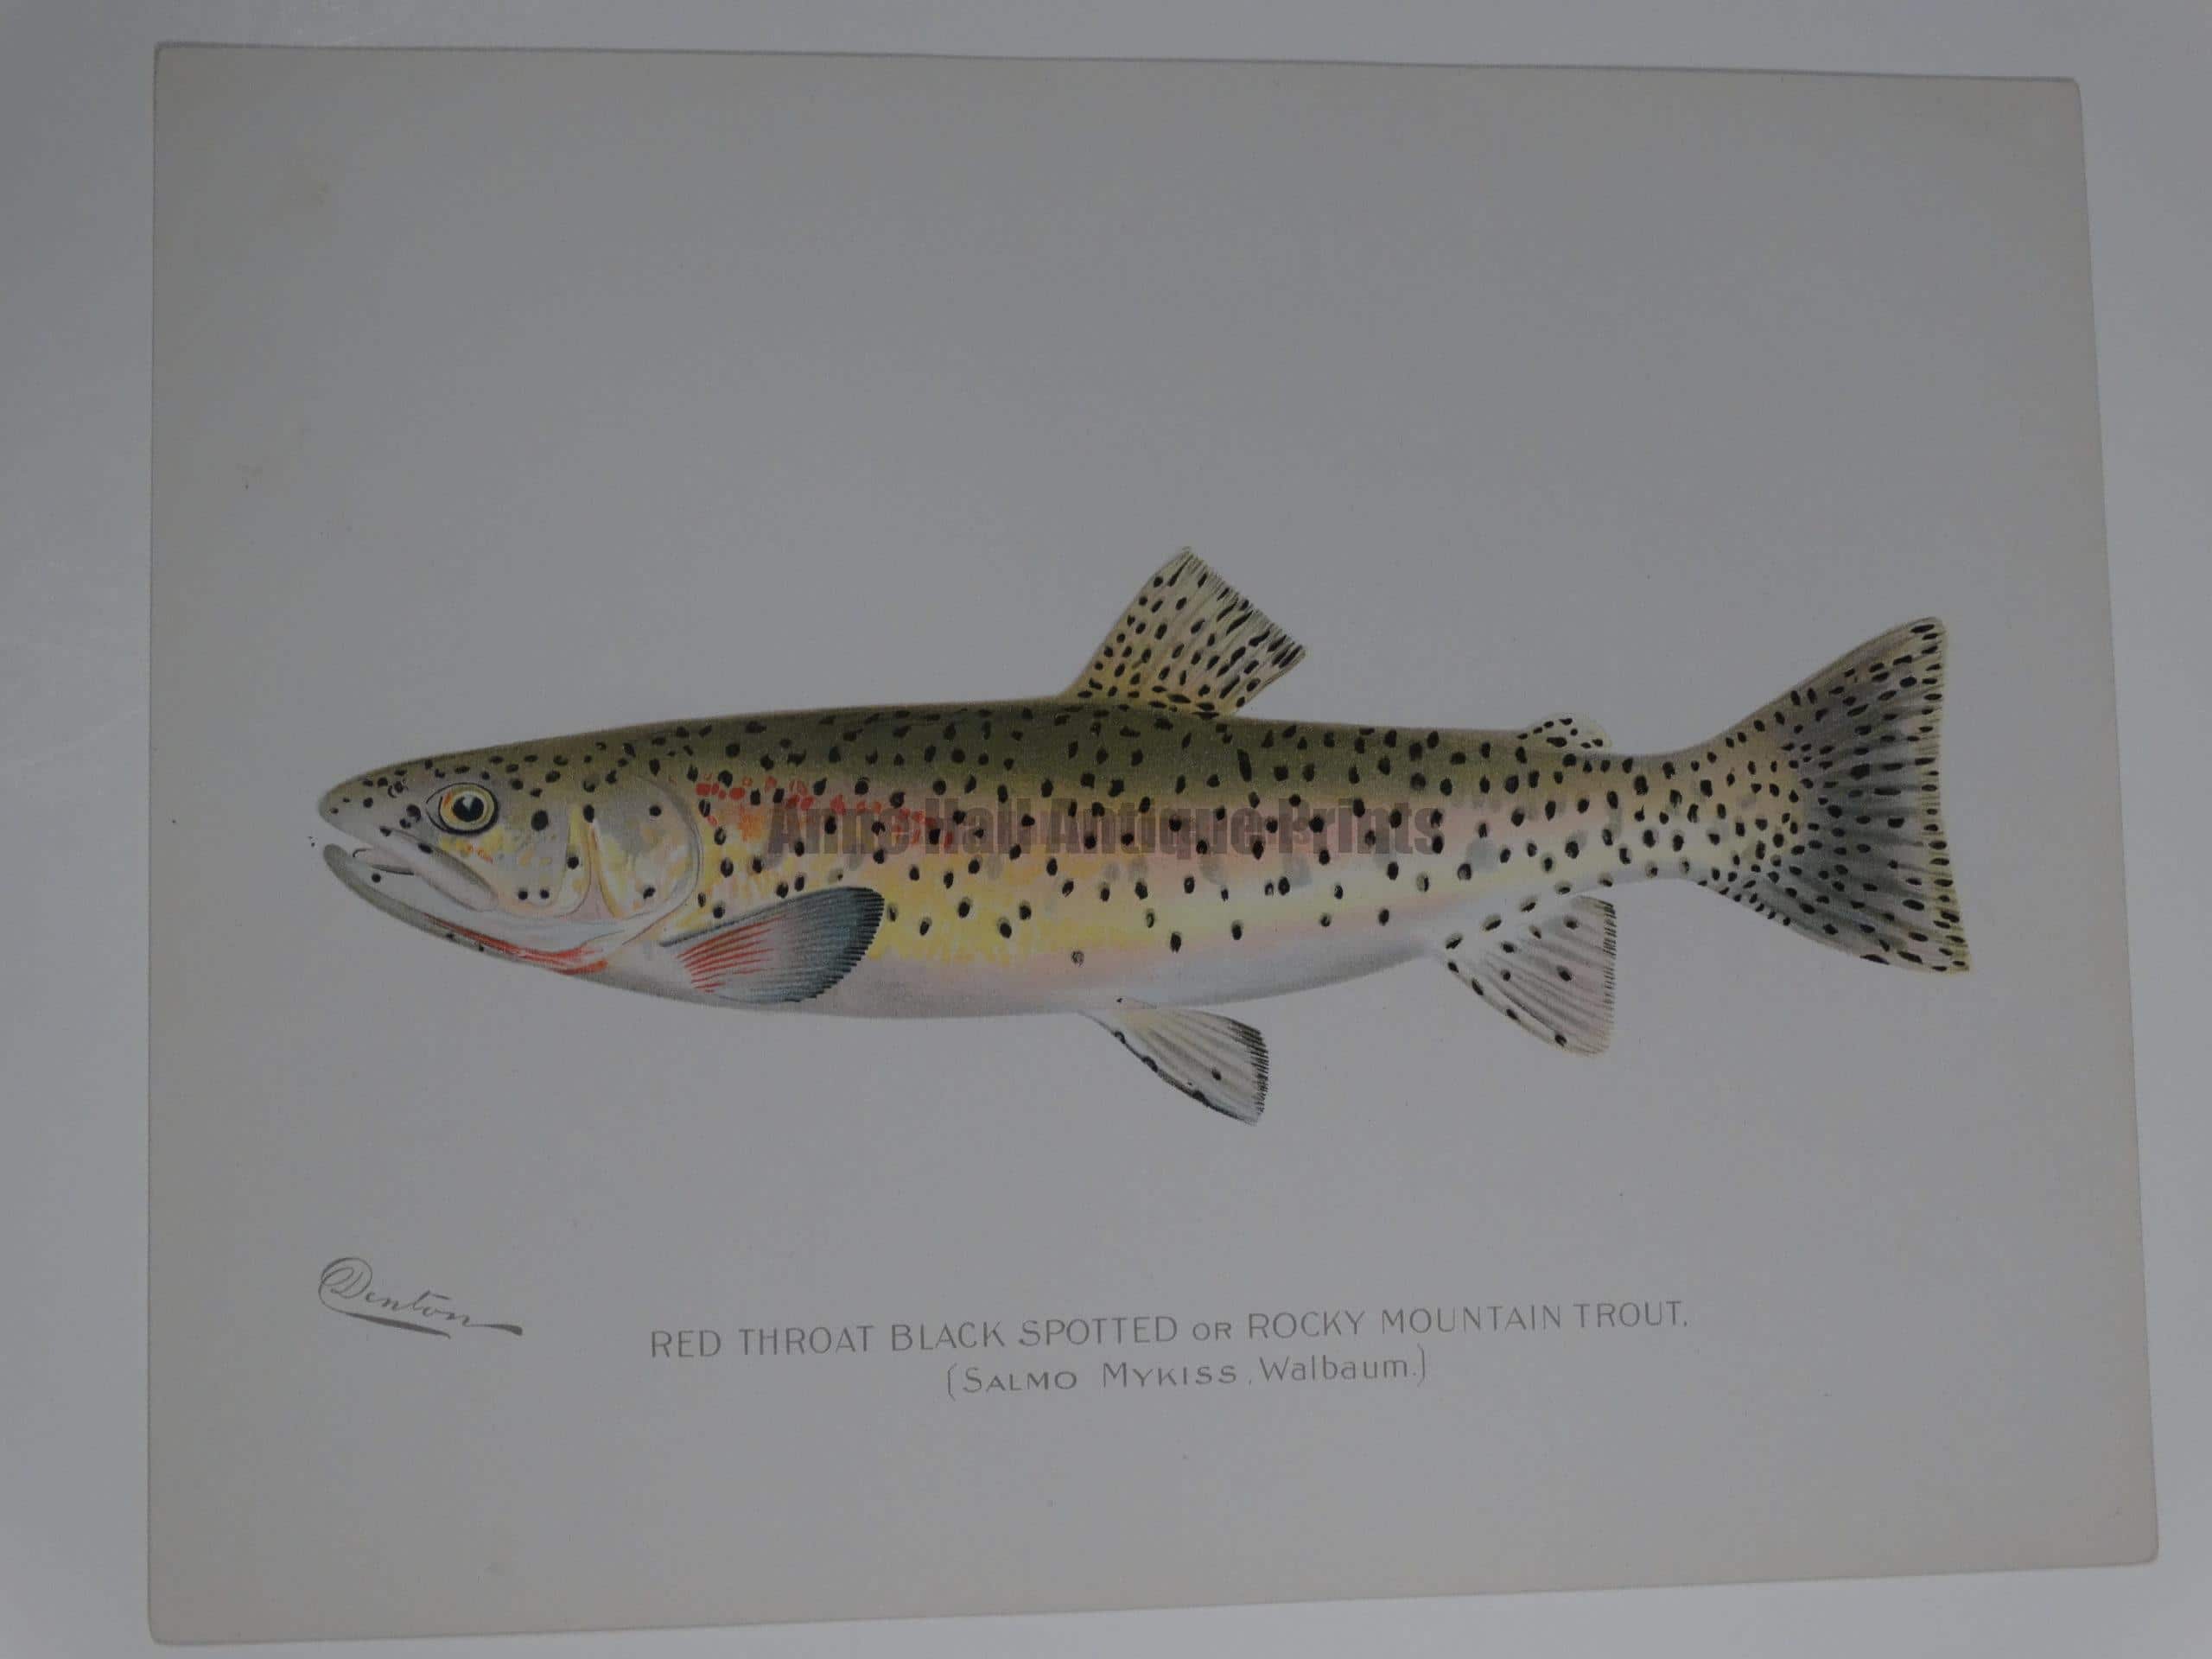 An original Sherman Denton Salmo Mykiss Trout. $125. An outstanding portfolio color lithograph published for Sherman Denton as documentation of trout-salmon found in North America.